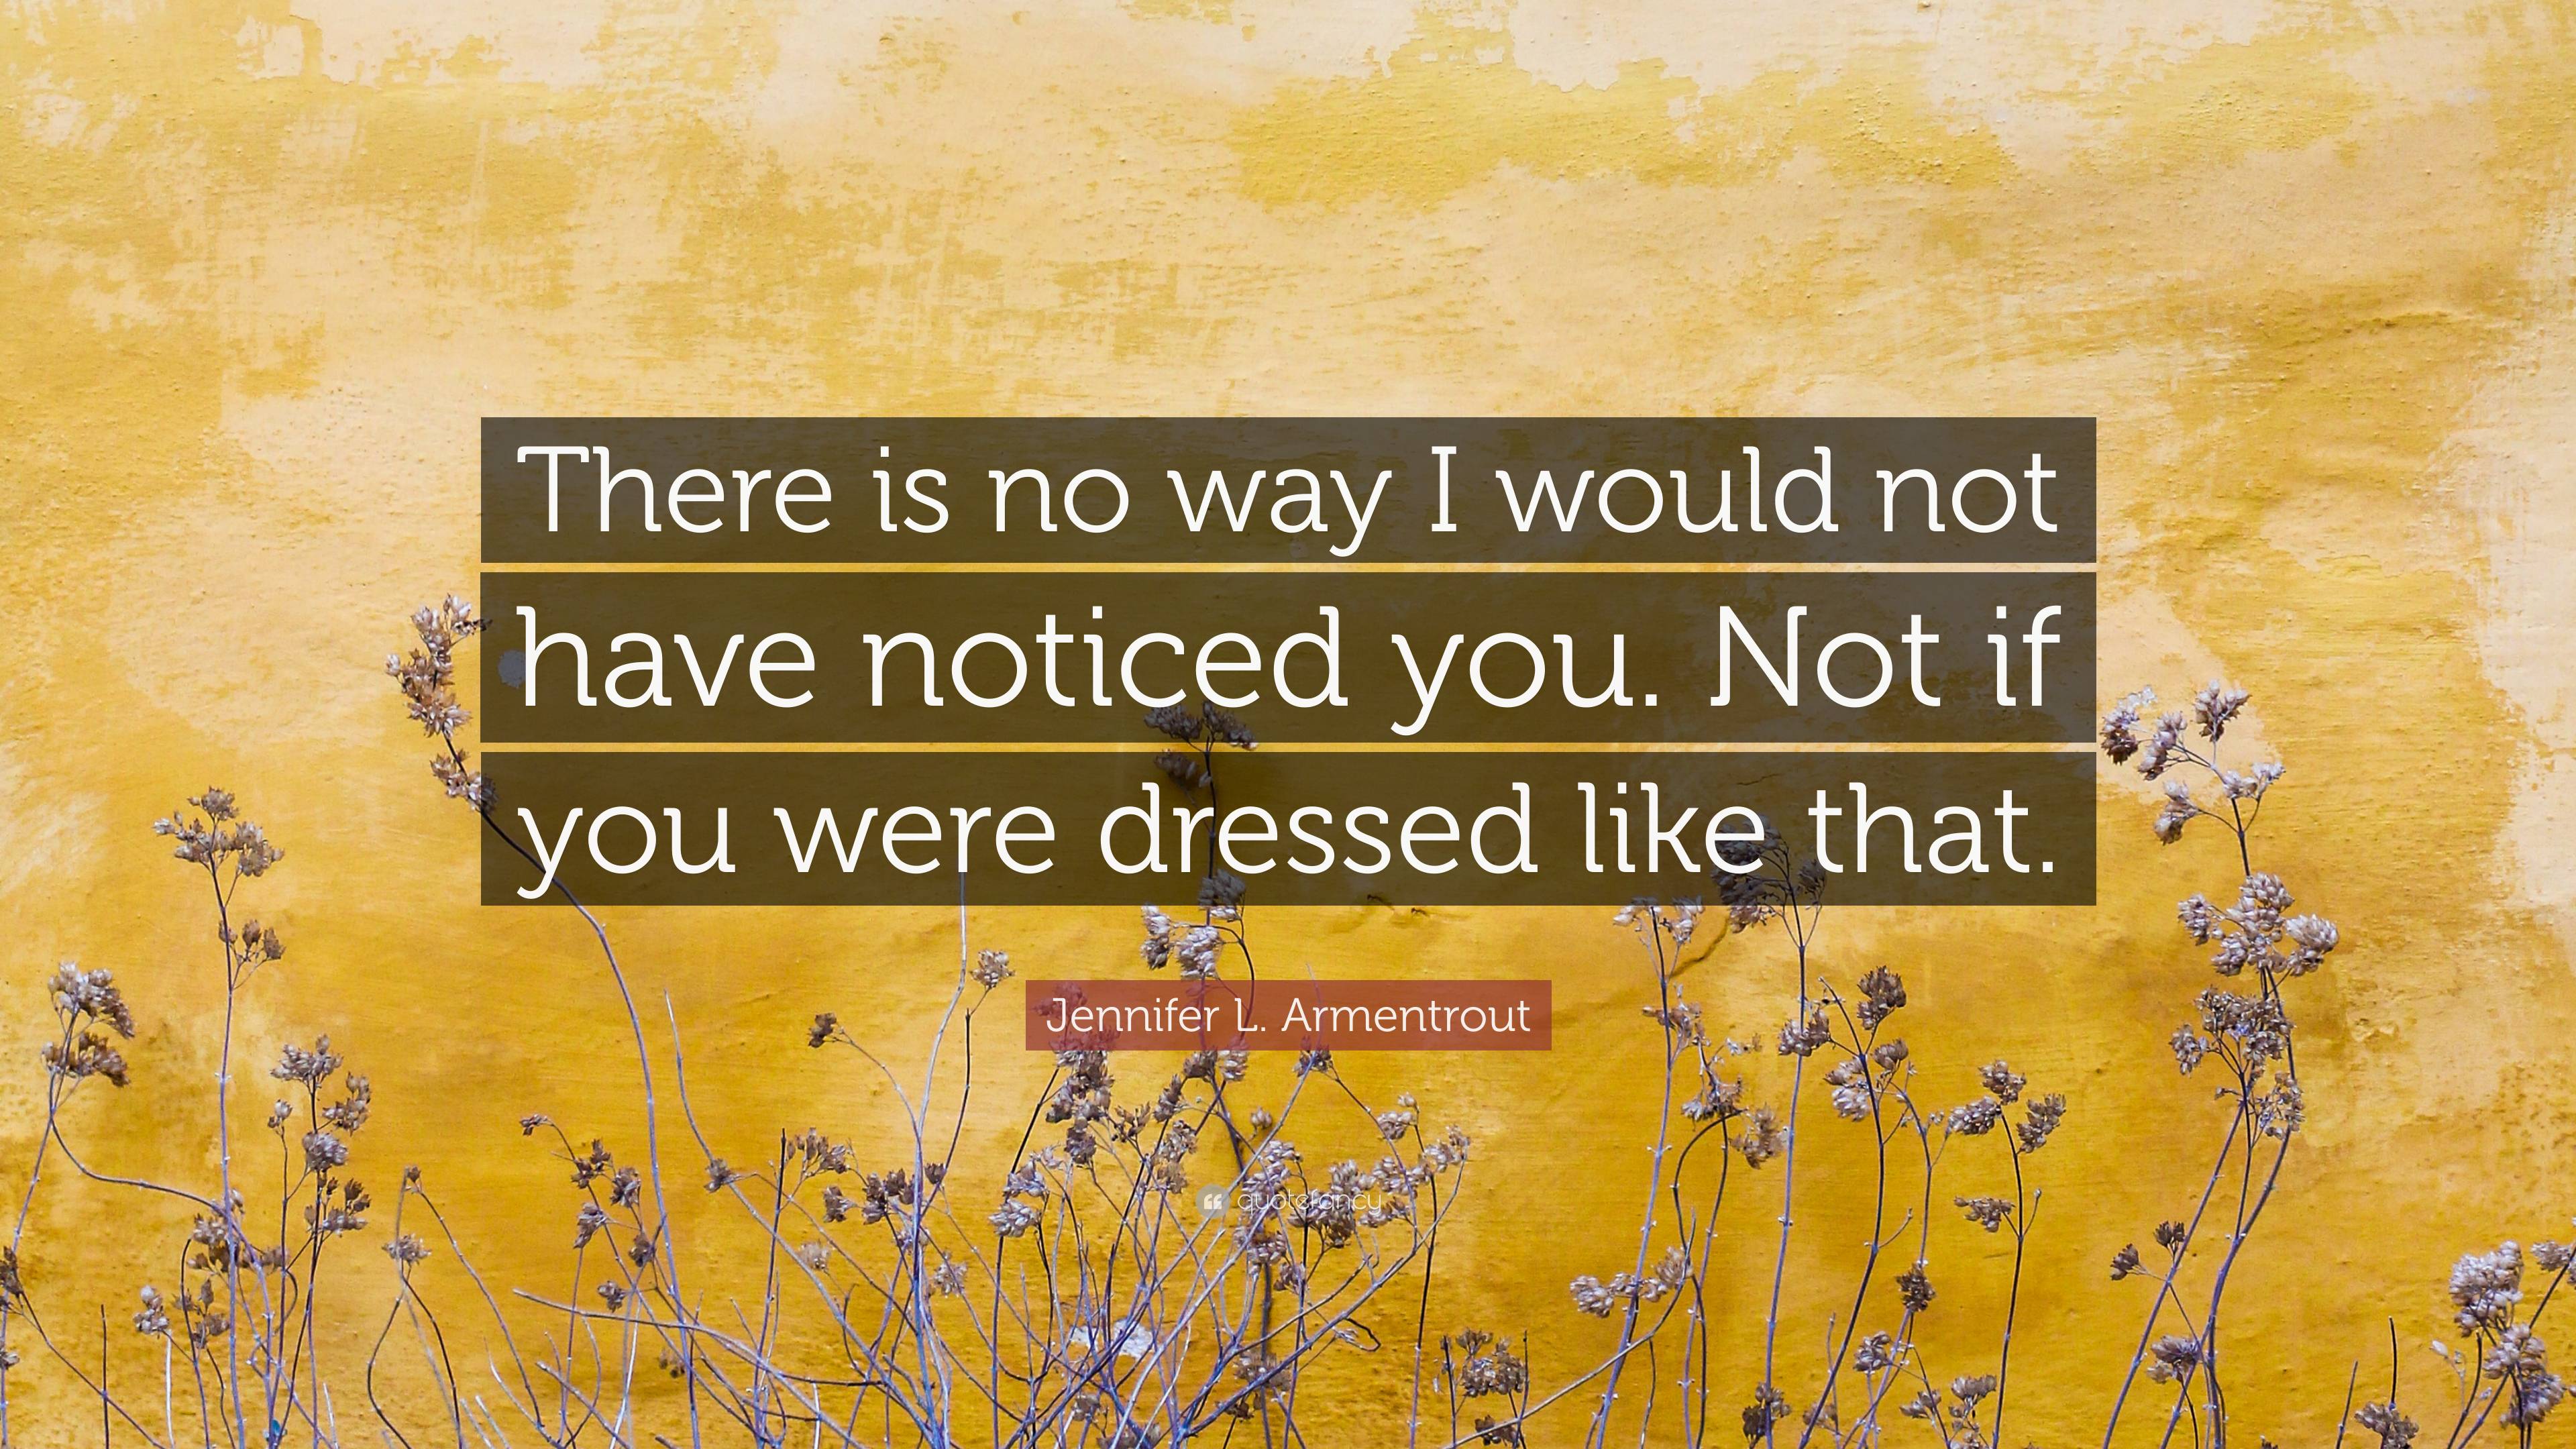 Jennifer L. Armentrout Quote: “There is no way I would not have noticed ...